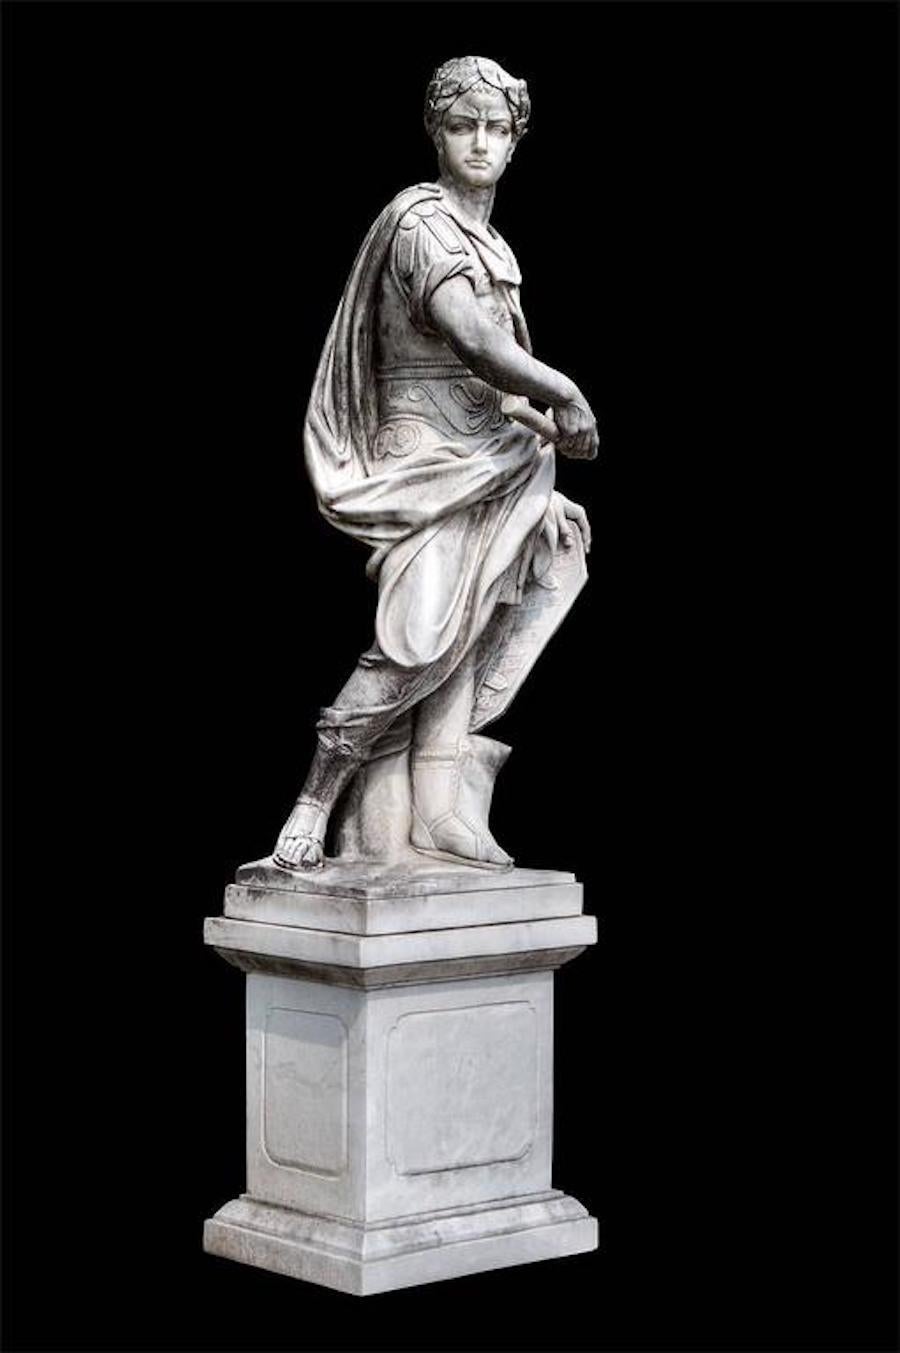 Standing figure of Julius Caesar wearing a Tunic and holding a billowing drapery with a composition marble square-section pedestal.
. The other figure is of Hannibal.
 Provenance from a Nord- Italian estate. 
Base:
H 85 cm, lxp=80x65 cm
 Sculpture